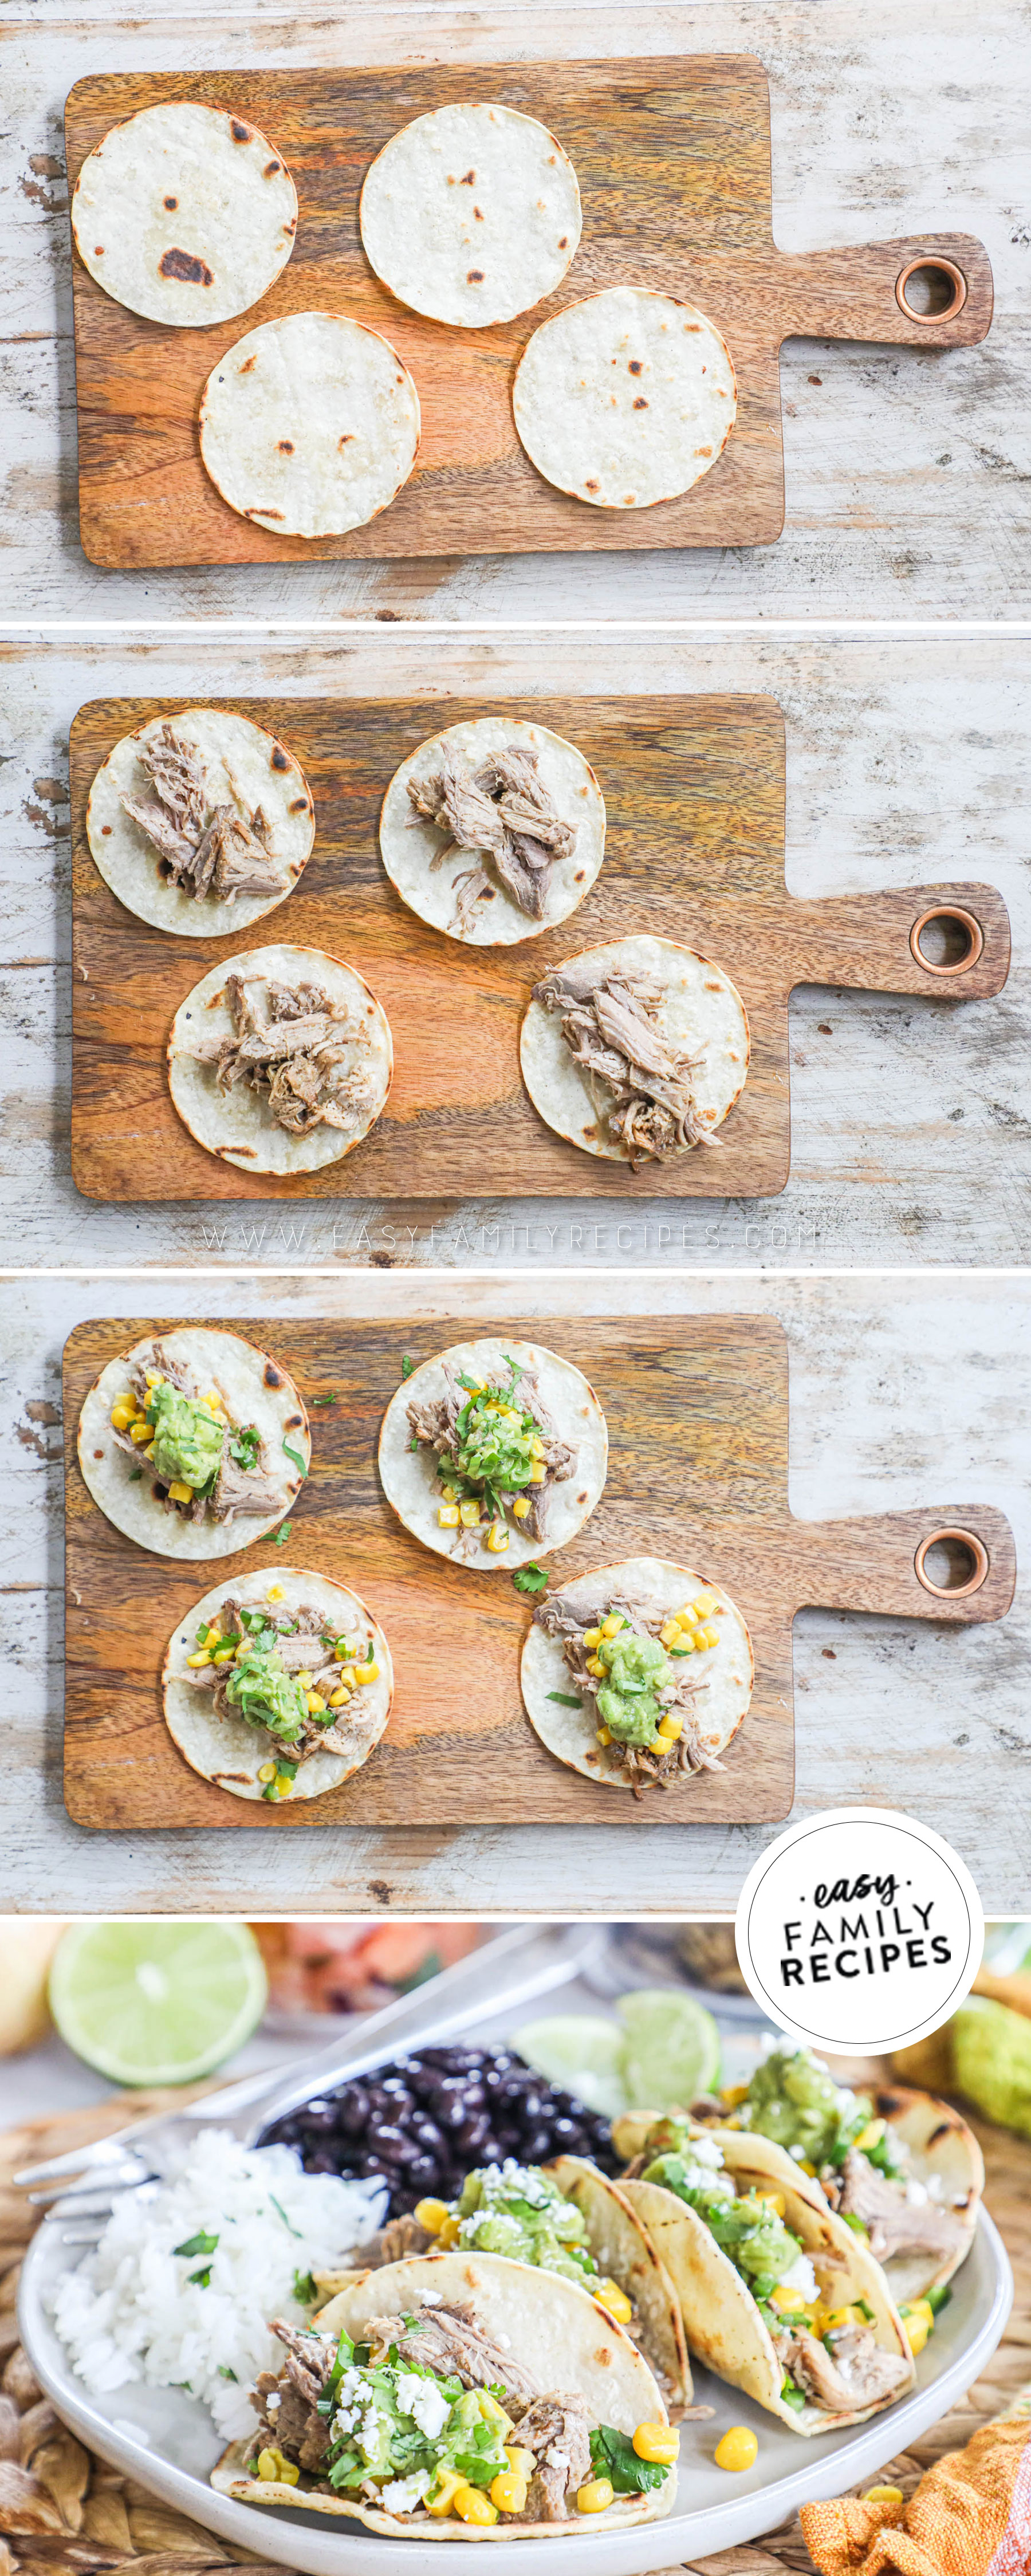 4 image collage on how to assemble pork carnitas street tacos.